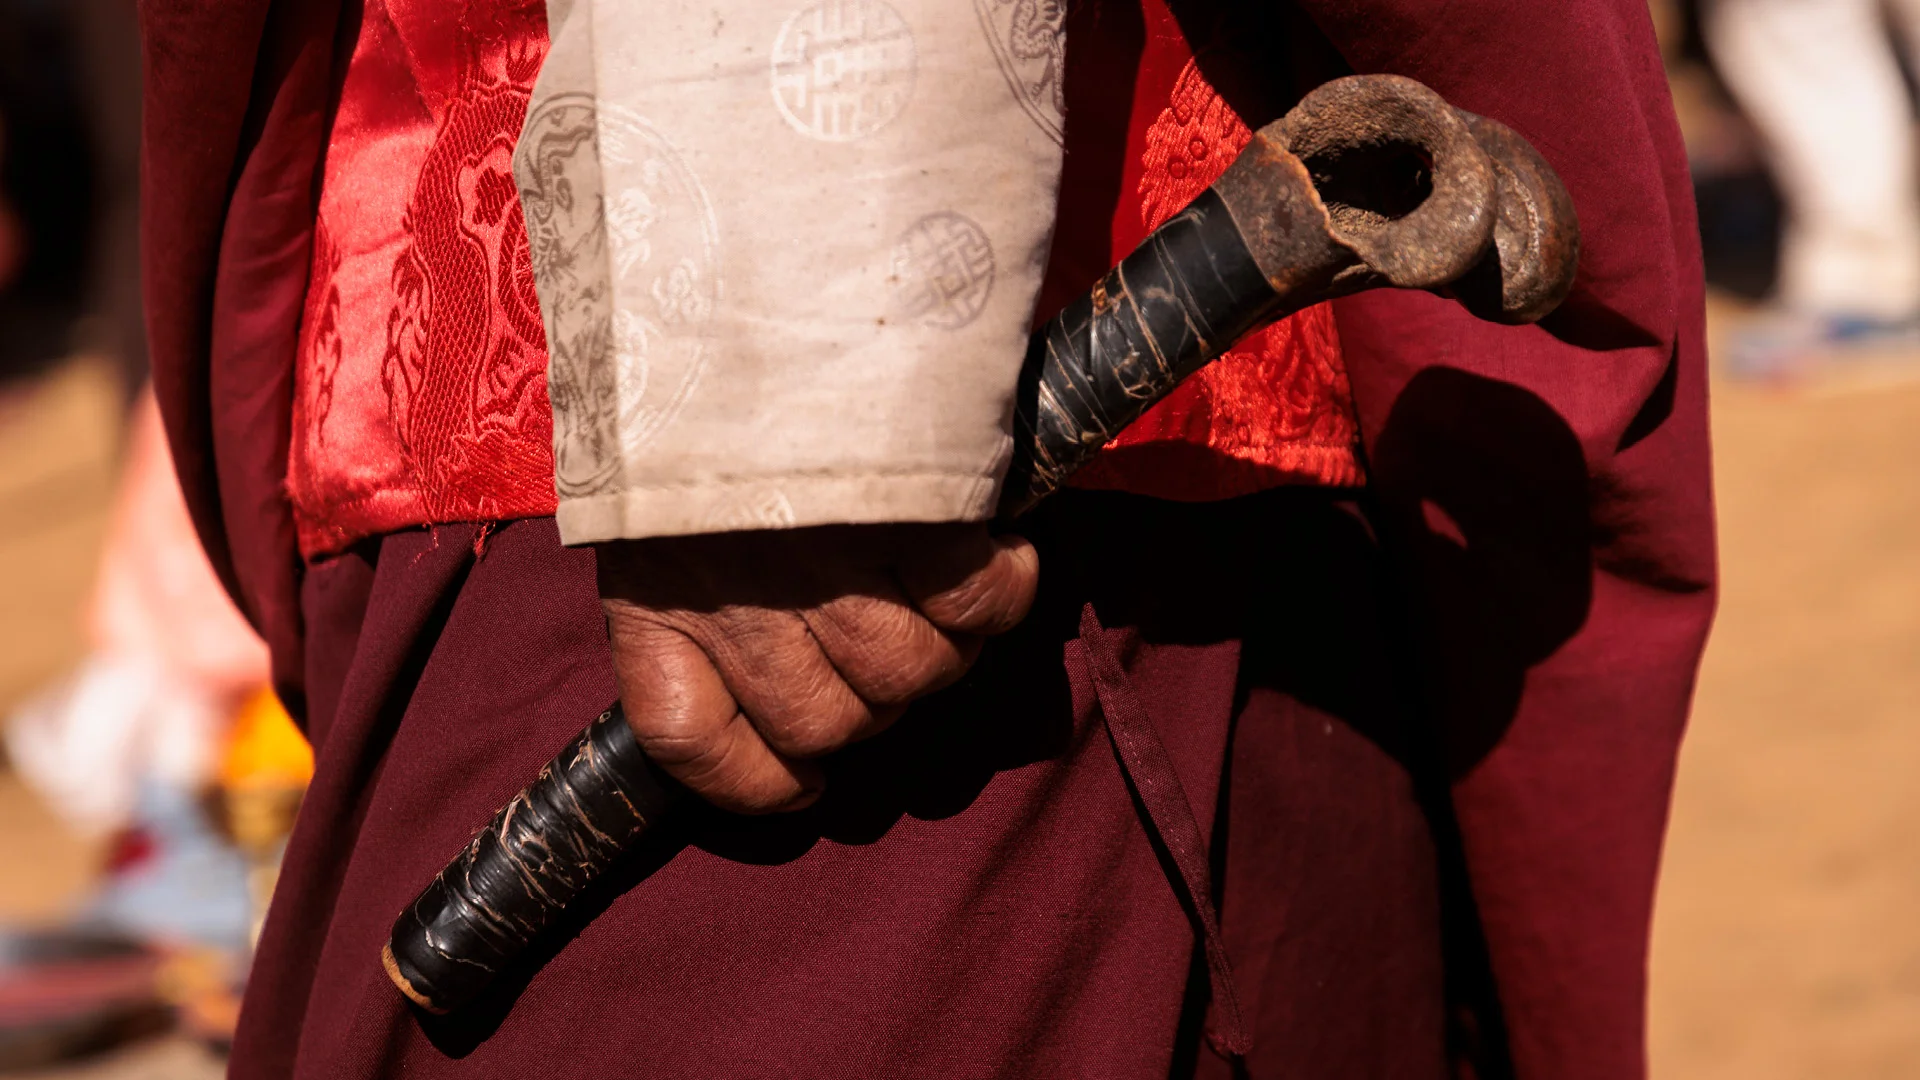 Lama holding a flude made of human bone in nepal